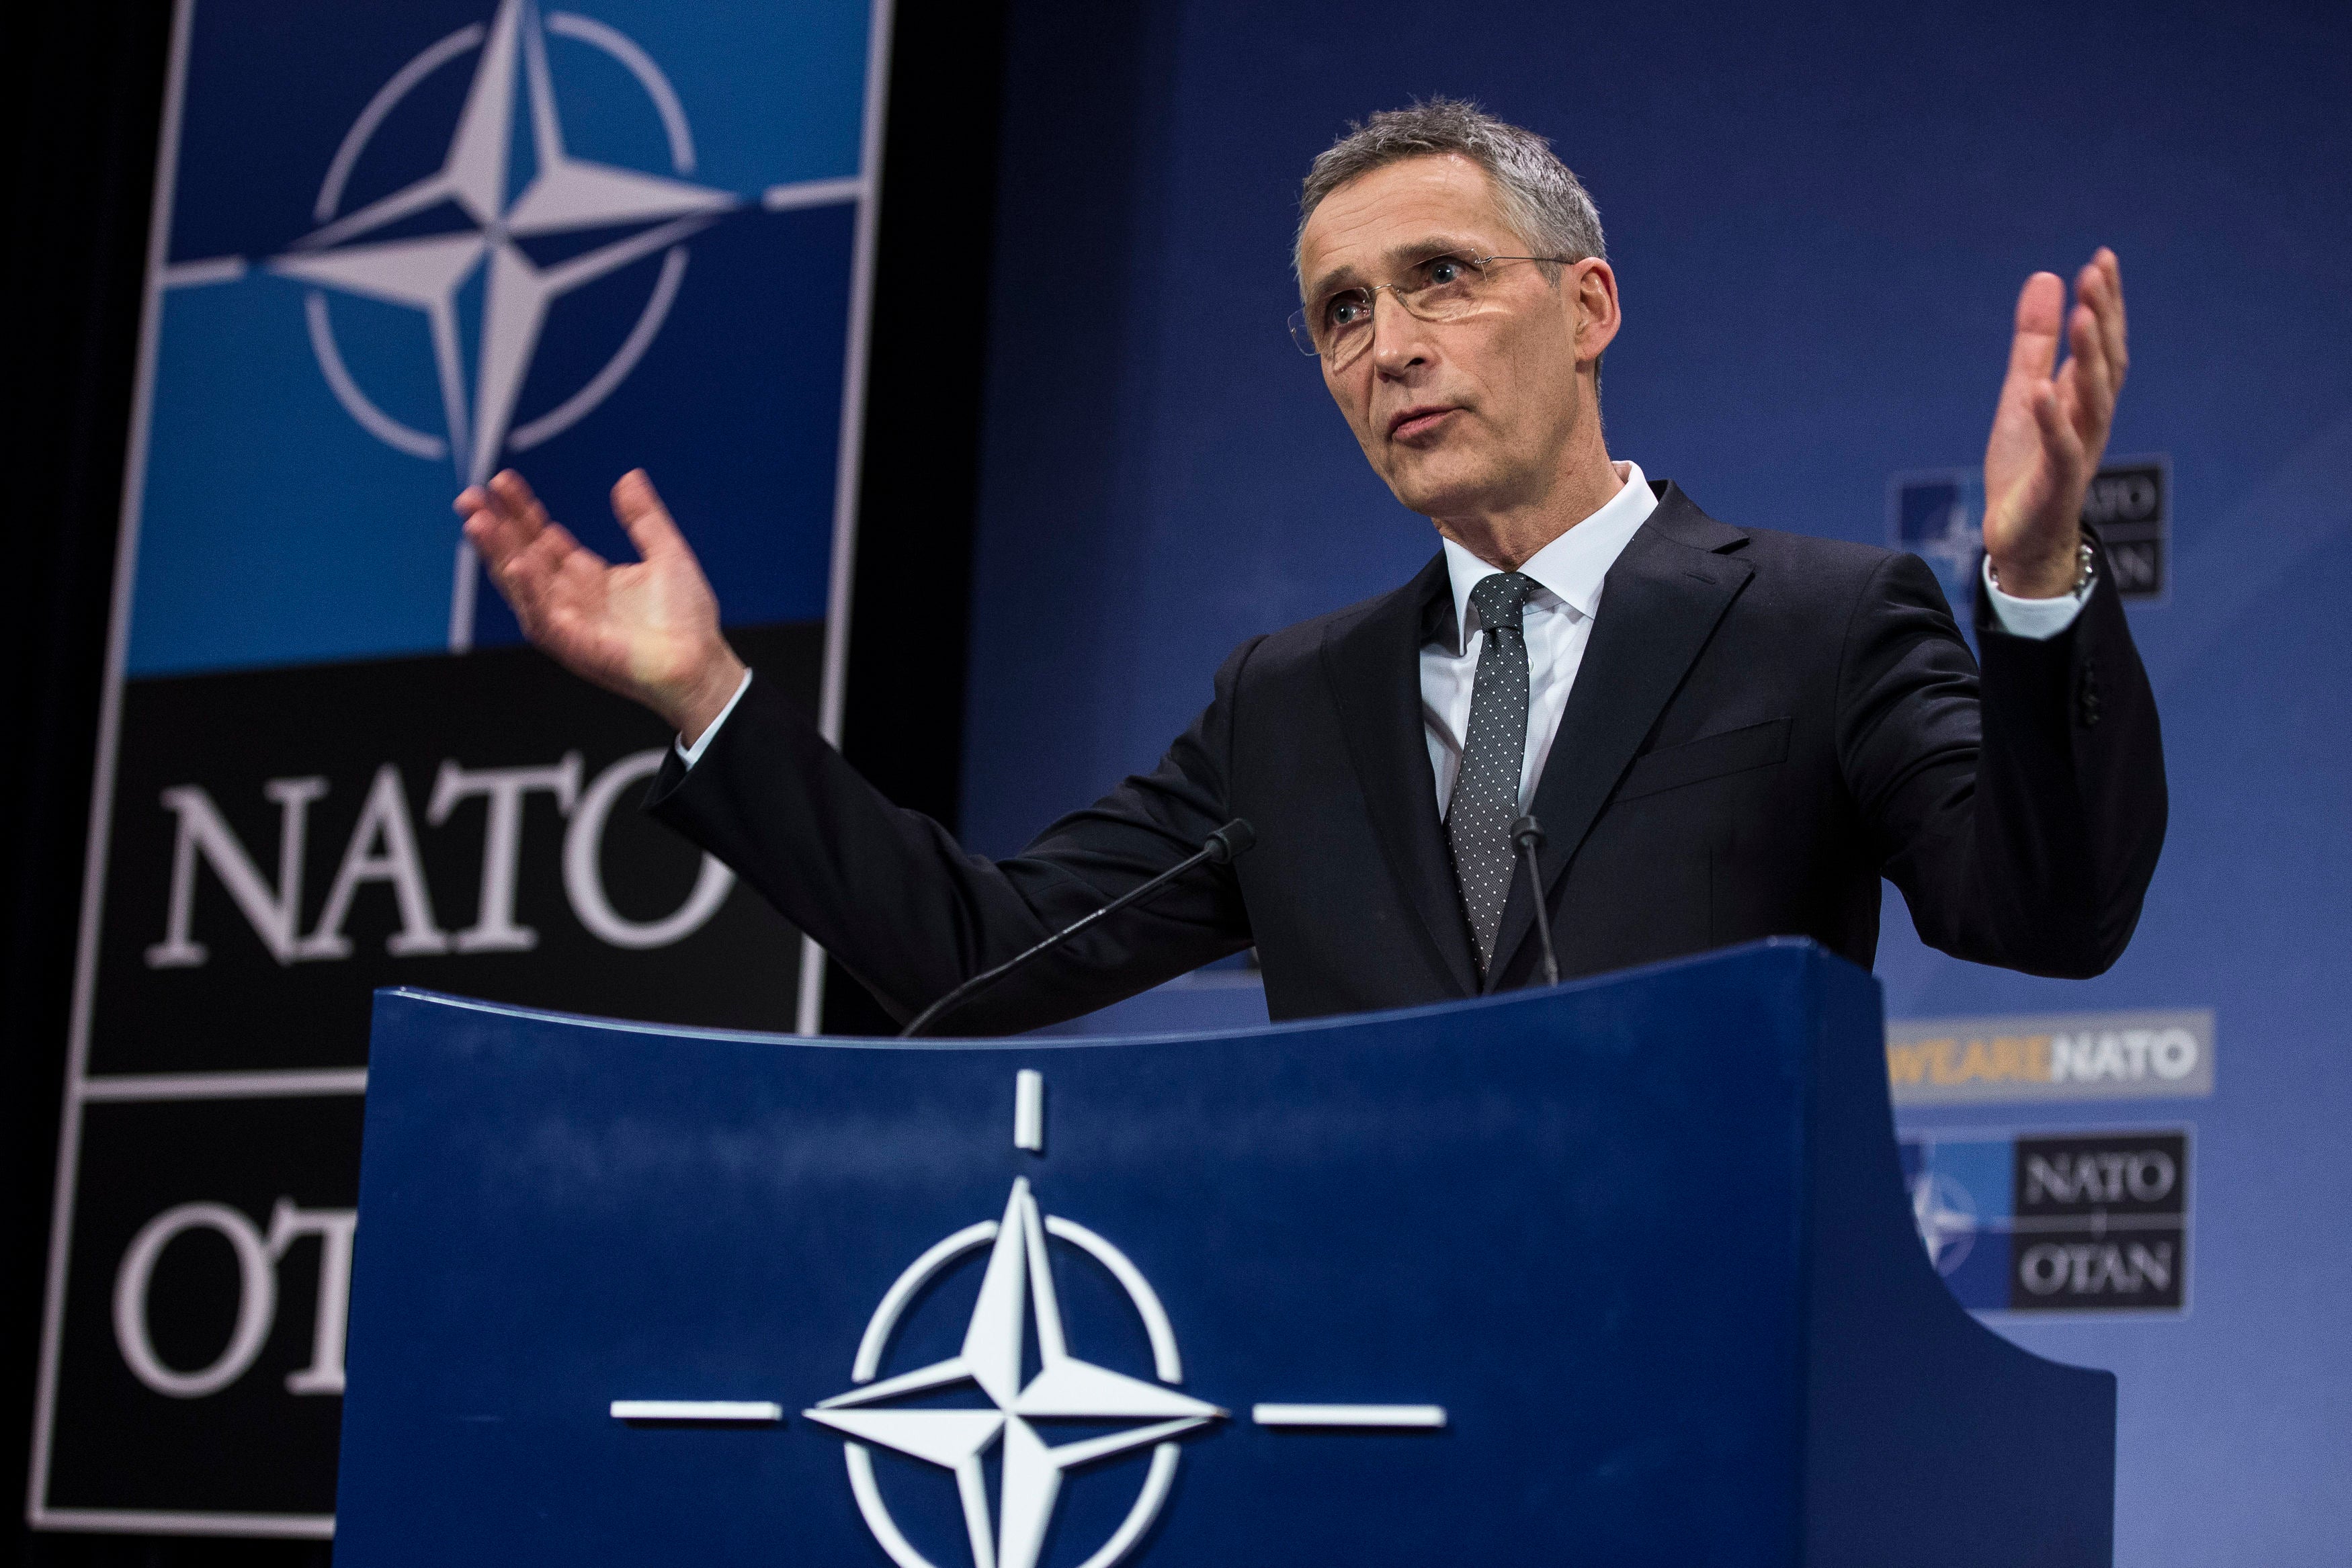 Nato secretary-general Jens Stoltenberg will need all of his nous to deal with Russia’s invasion of Ukraine